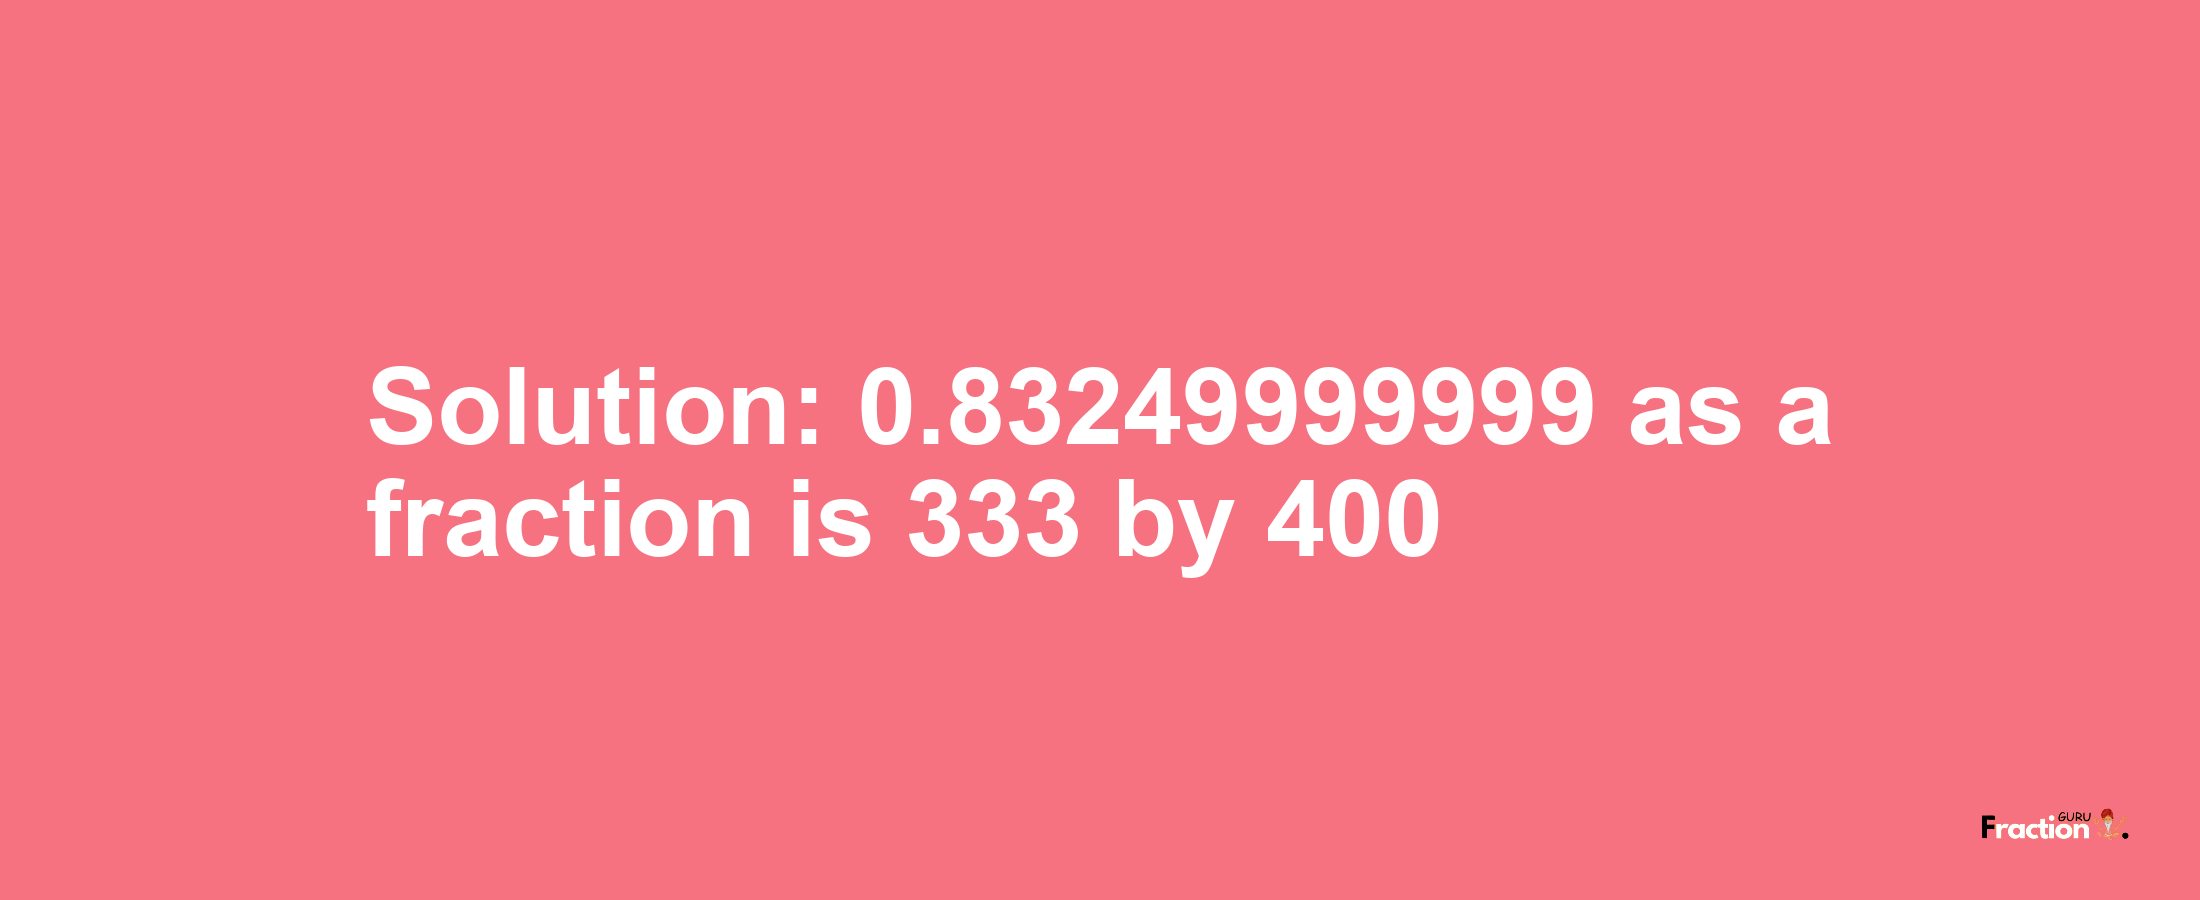 Solution:0.83249999999 as a fraction is 333/400